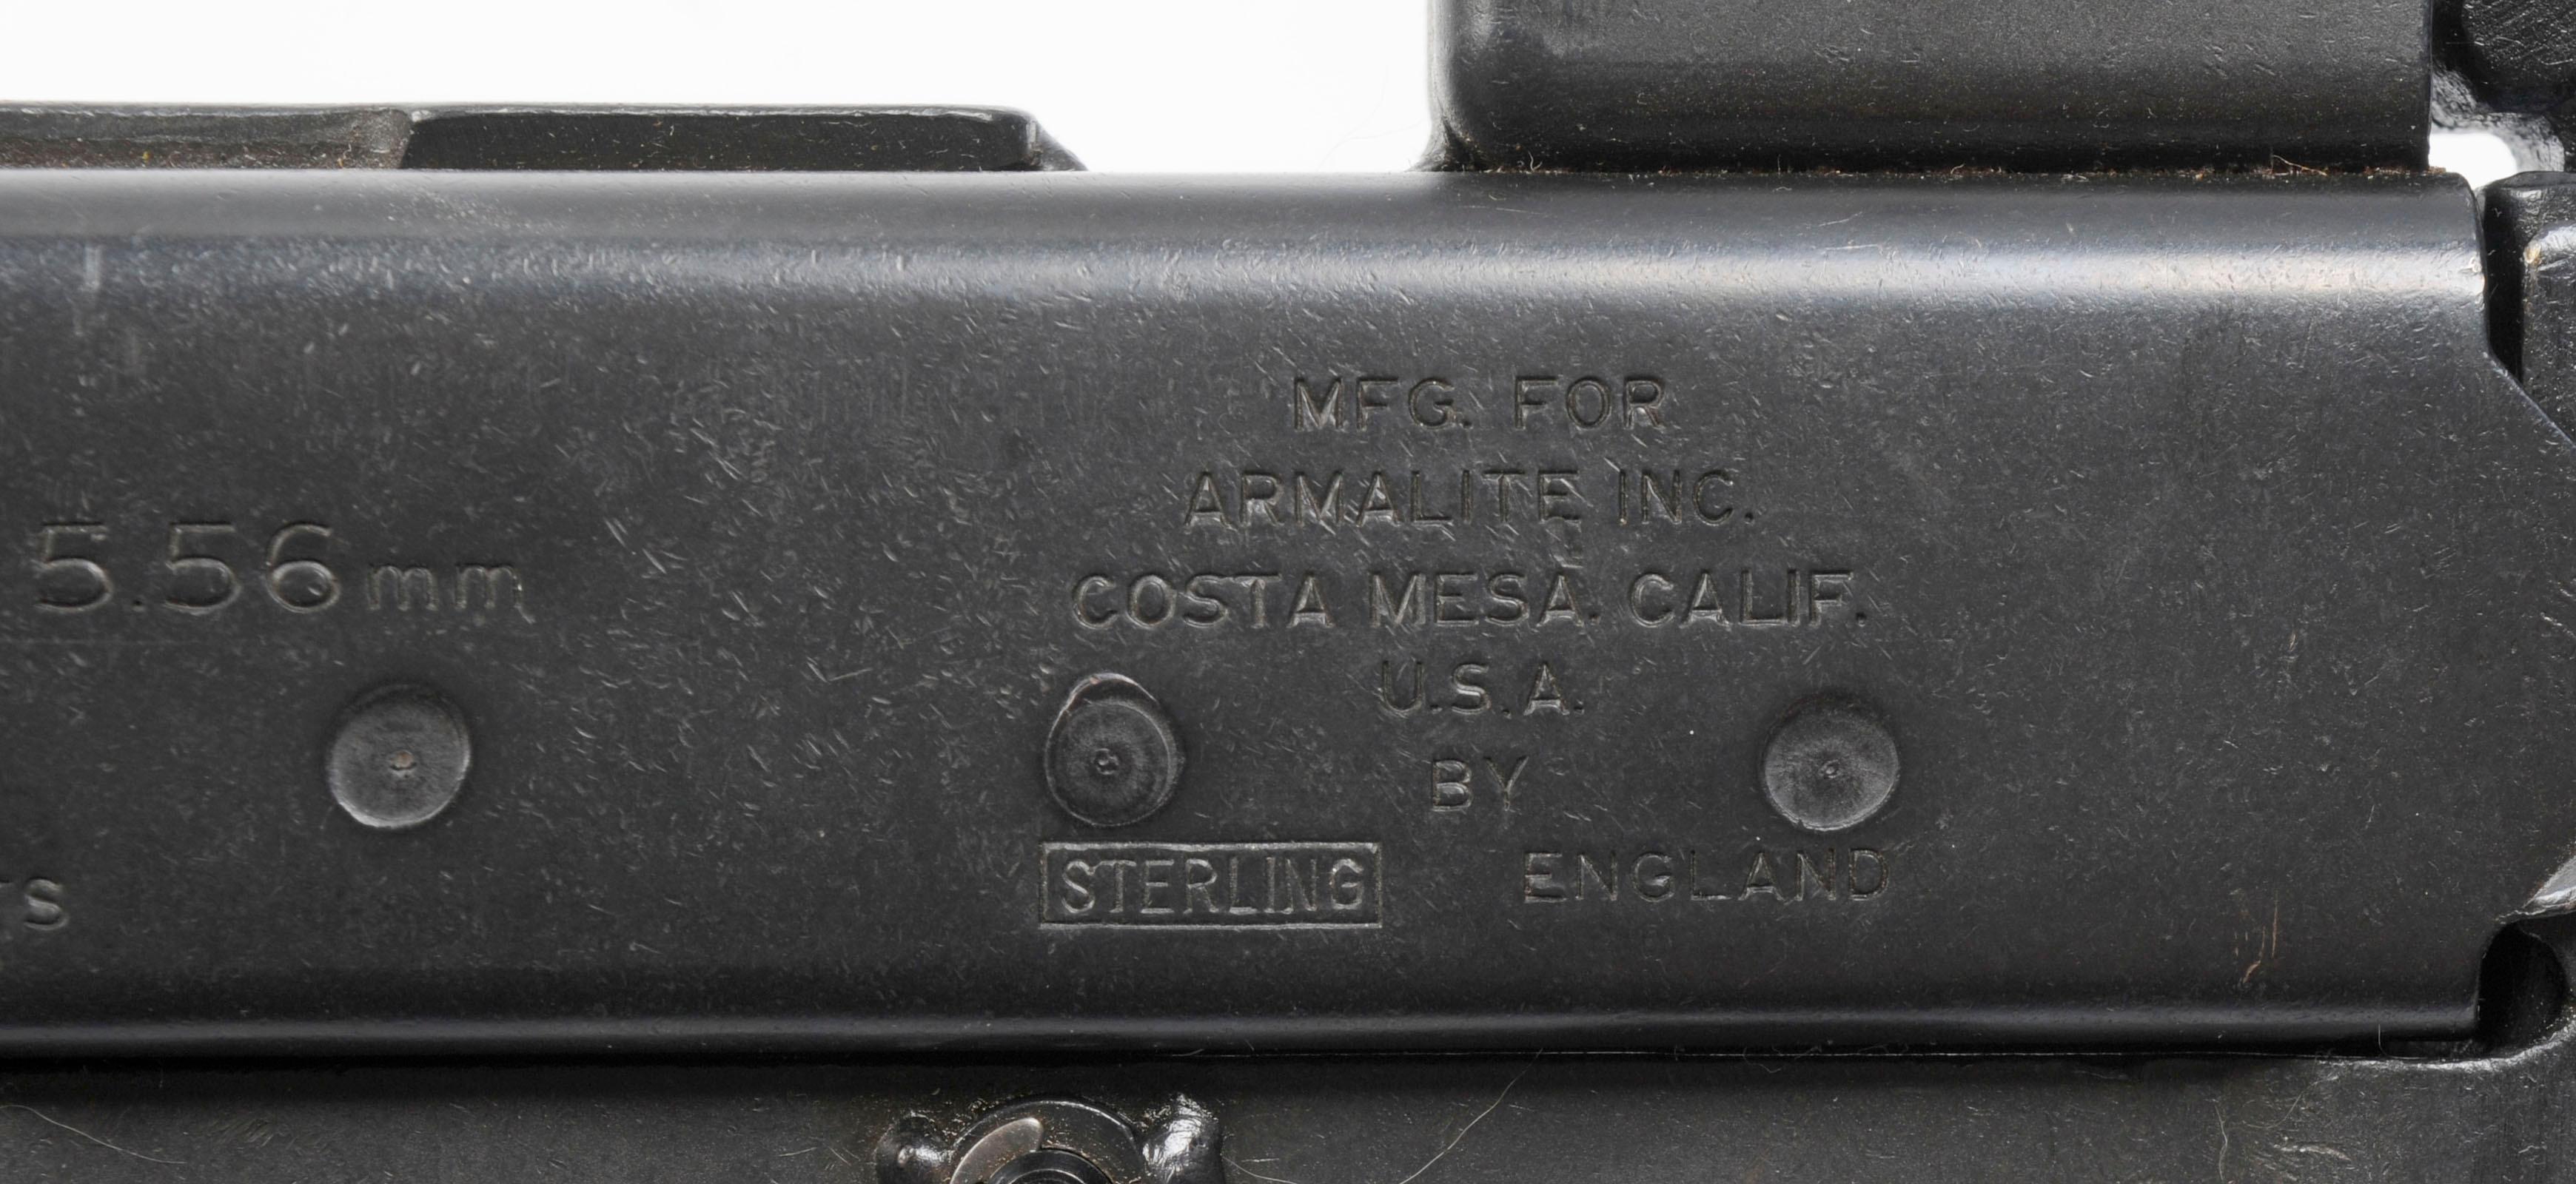 RARE Armalite AR-180 5.56mm Sterling England Semi Automatic Rifle FFL Required S24831  (A1)